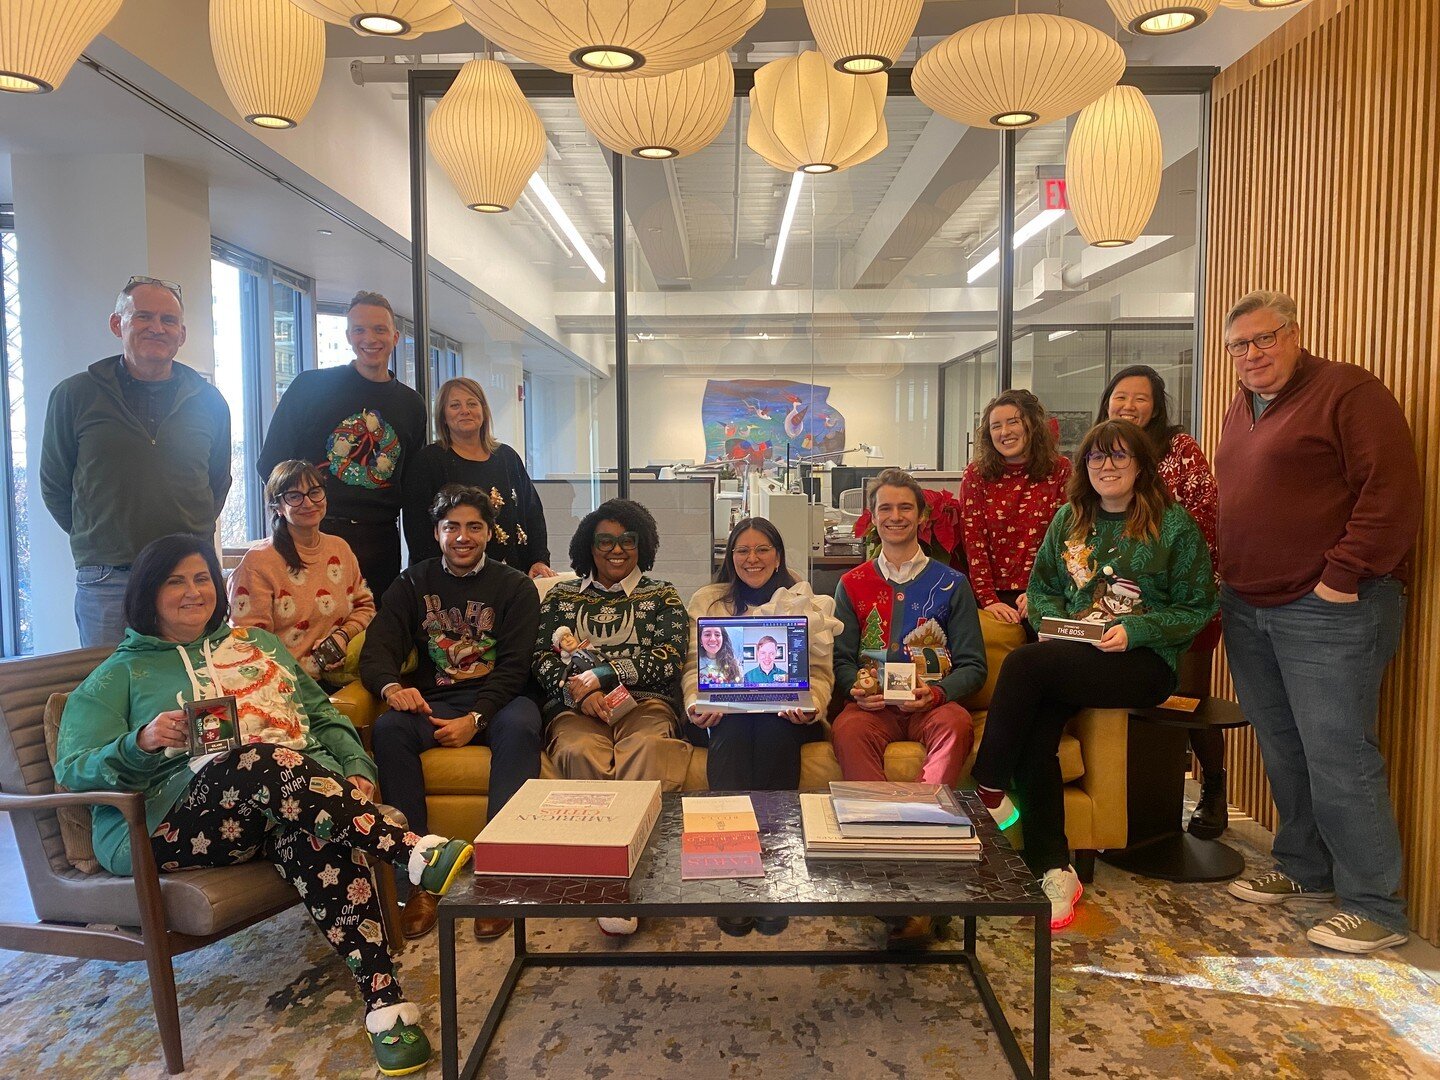 The 2023 Ugly Christmas Sweater contest was once again a success! Congrats to our winners and special thanks to our team for ringing in the holiday spirit!

#UglyChristmasSweater #UDAstudio #Holidays #UrbanDesign #Pittsburgh